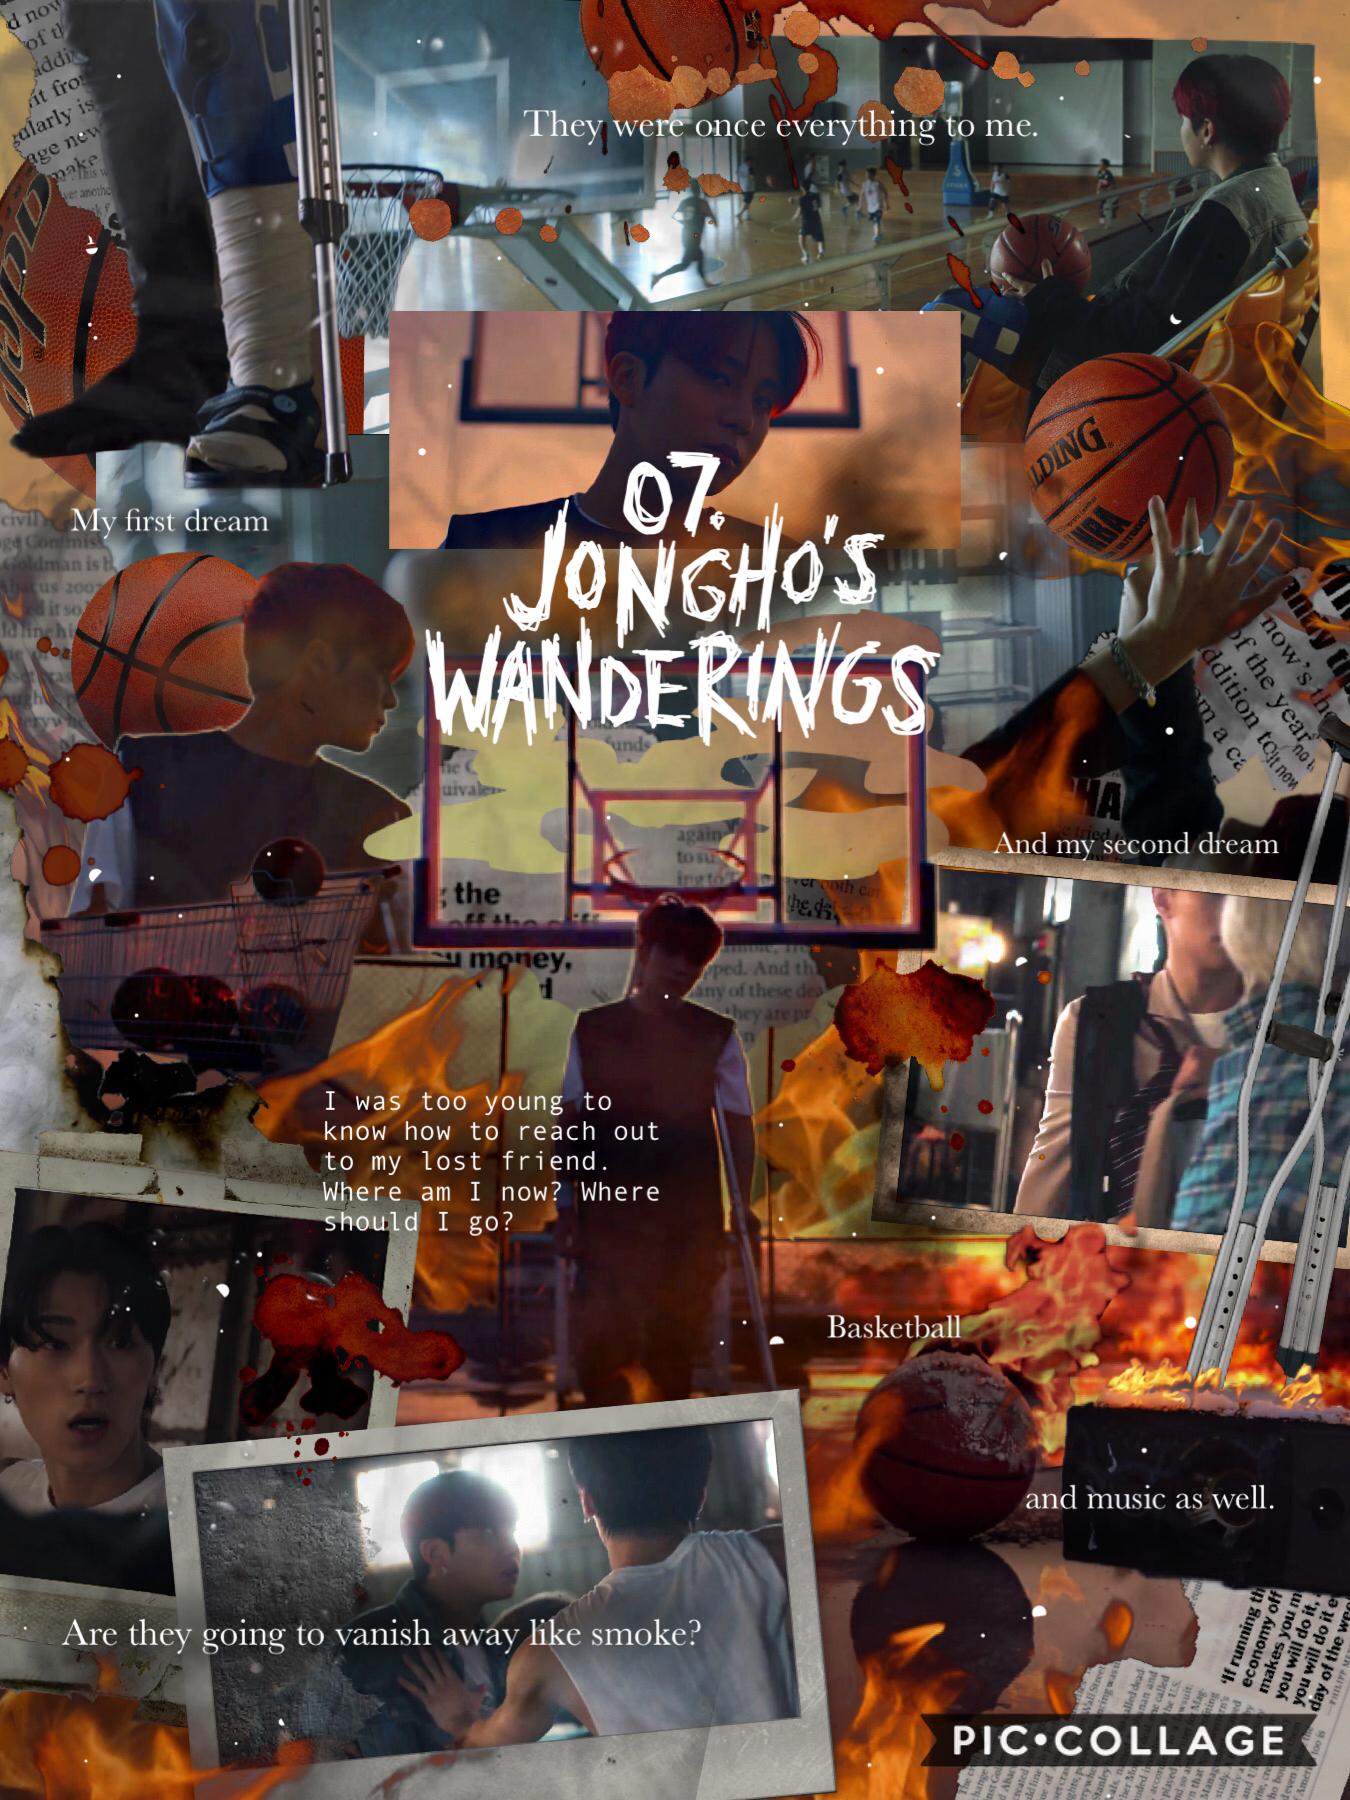 [8/10] 07. “Jongho’s Wanderings” | JH might have also been involved in the car crash (maybe he’s YH’s brother? car crash➡️leg injury➡️losing his dreams). Perhaps his “lost friend”=Mingi becuz of their fight scene? Or maybe it’s that guy Mingi bullies? 